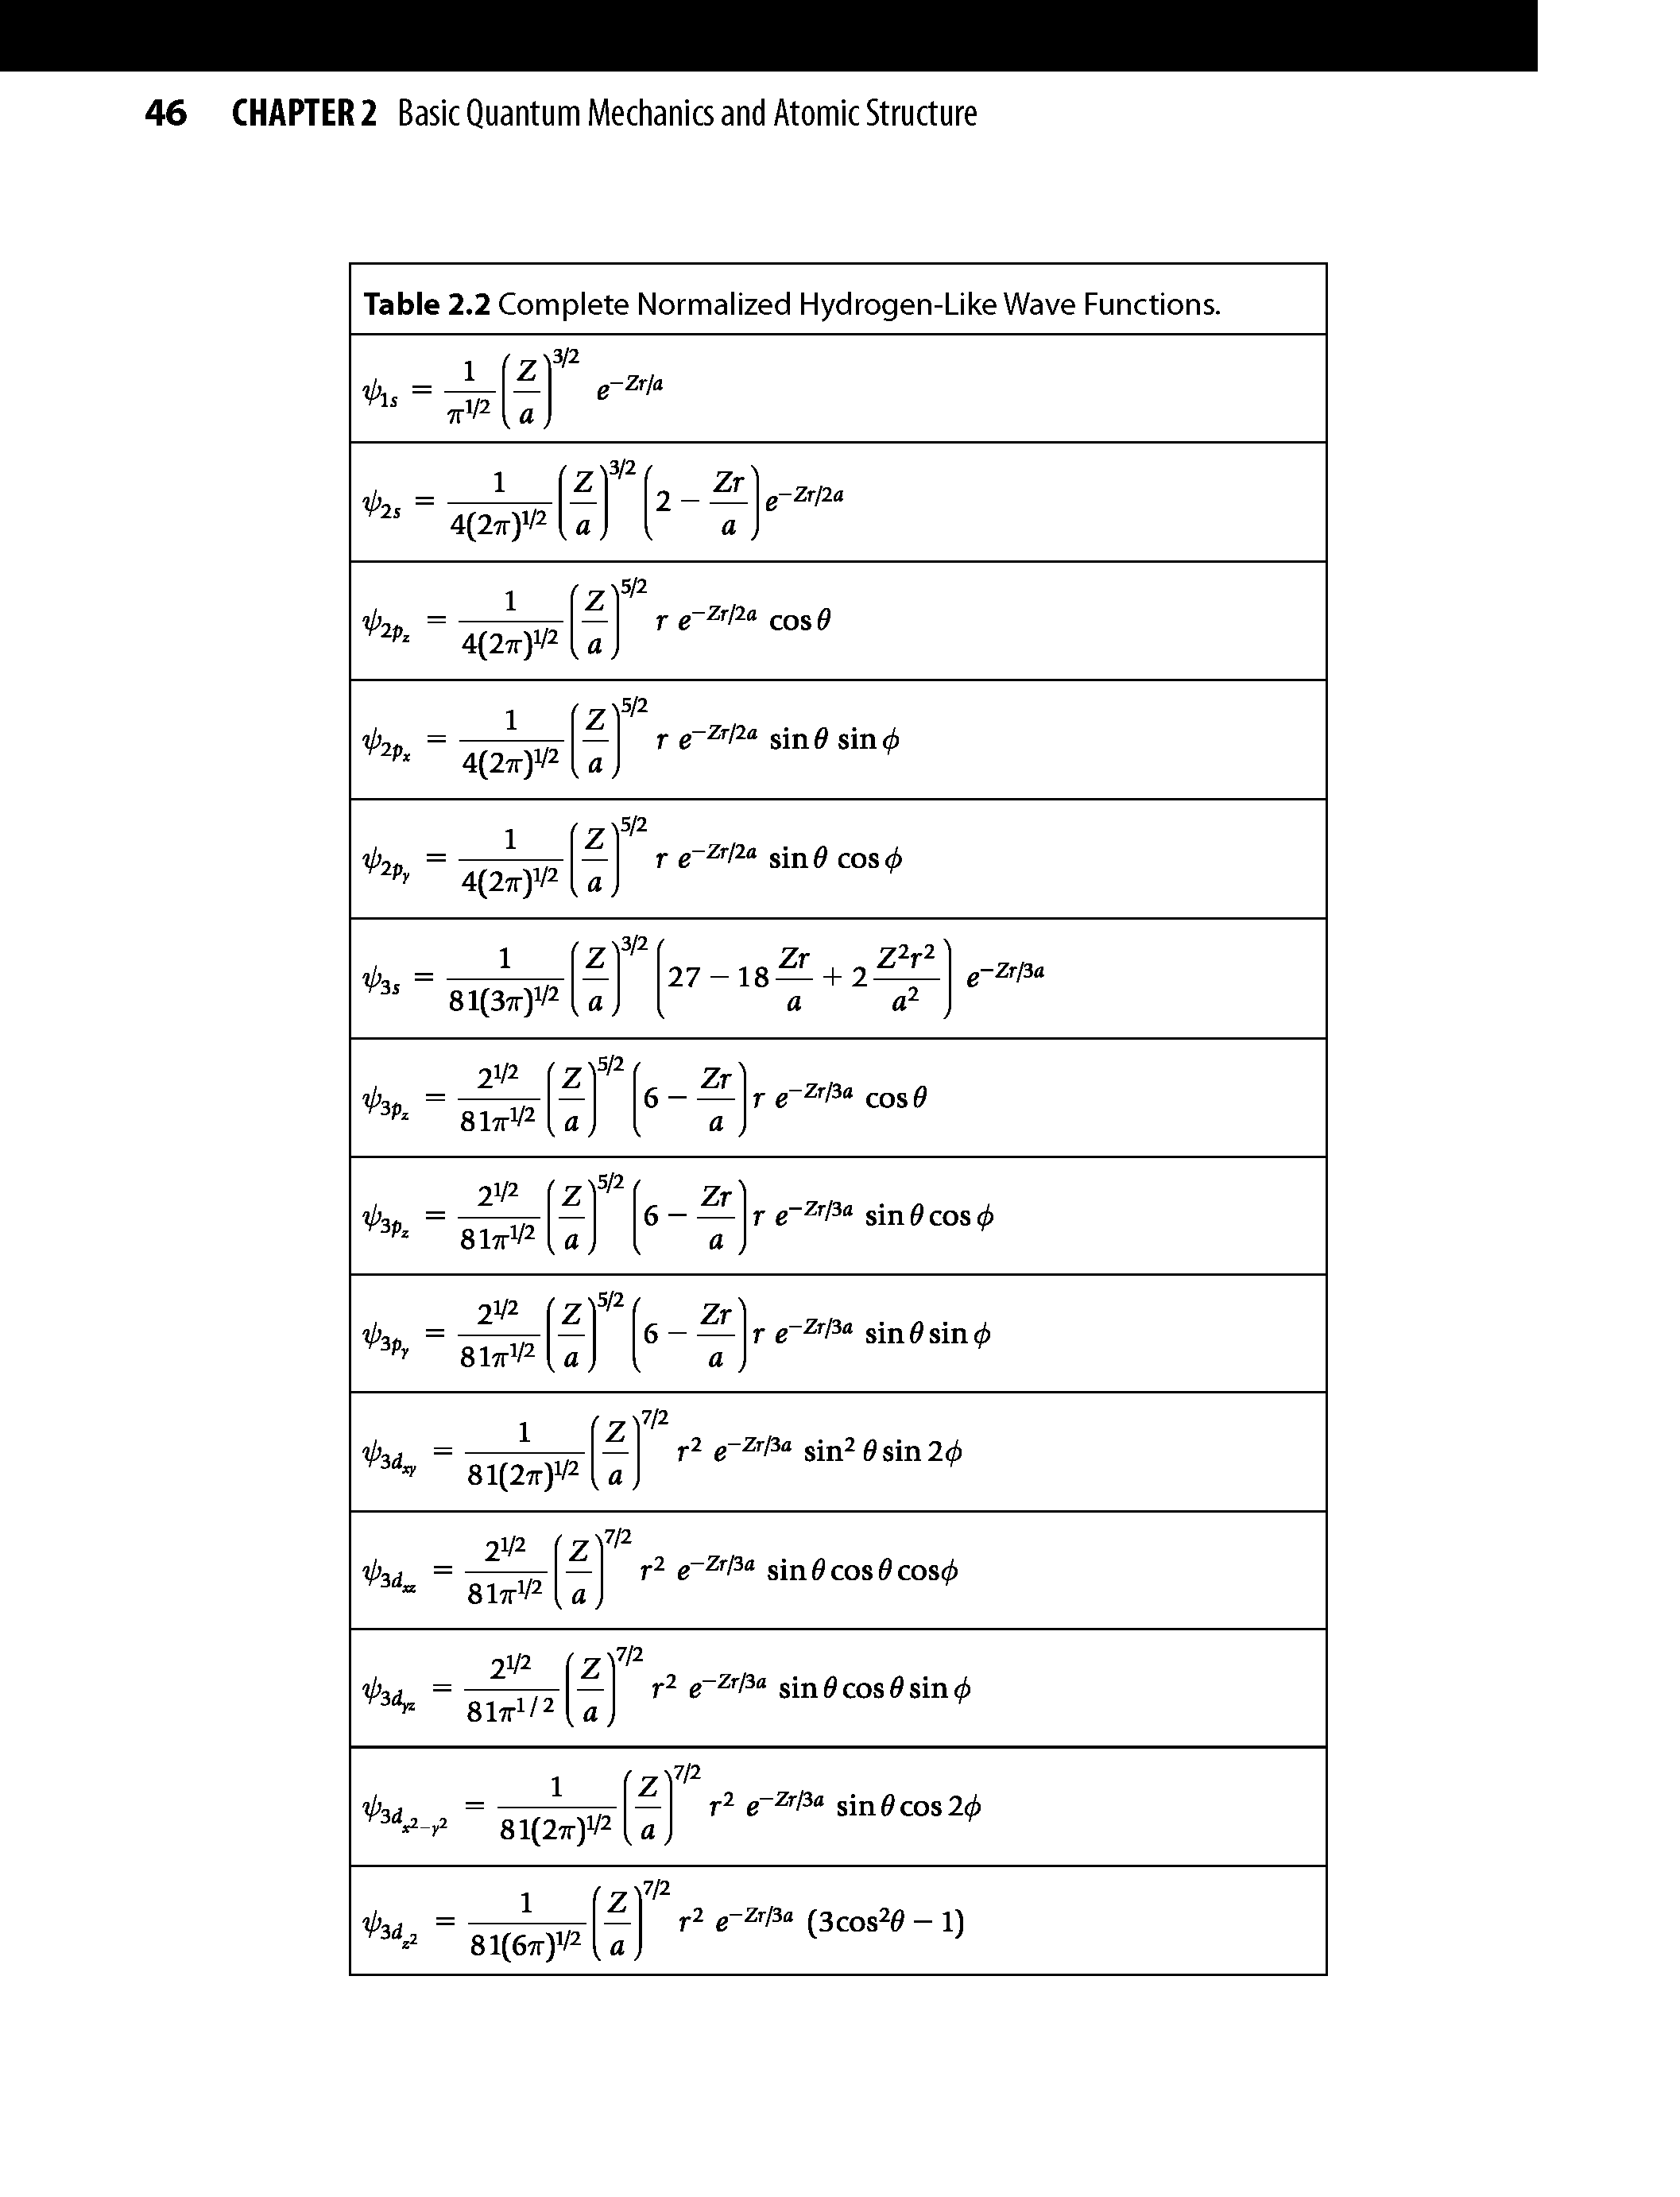 Table 2.2 Complete Normalized Hydrogen-Like Wave Functions.